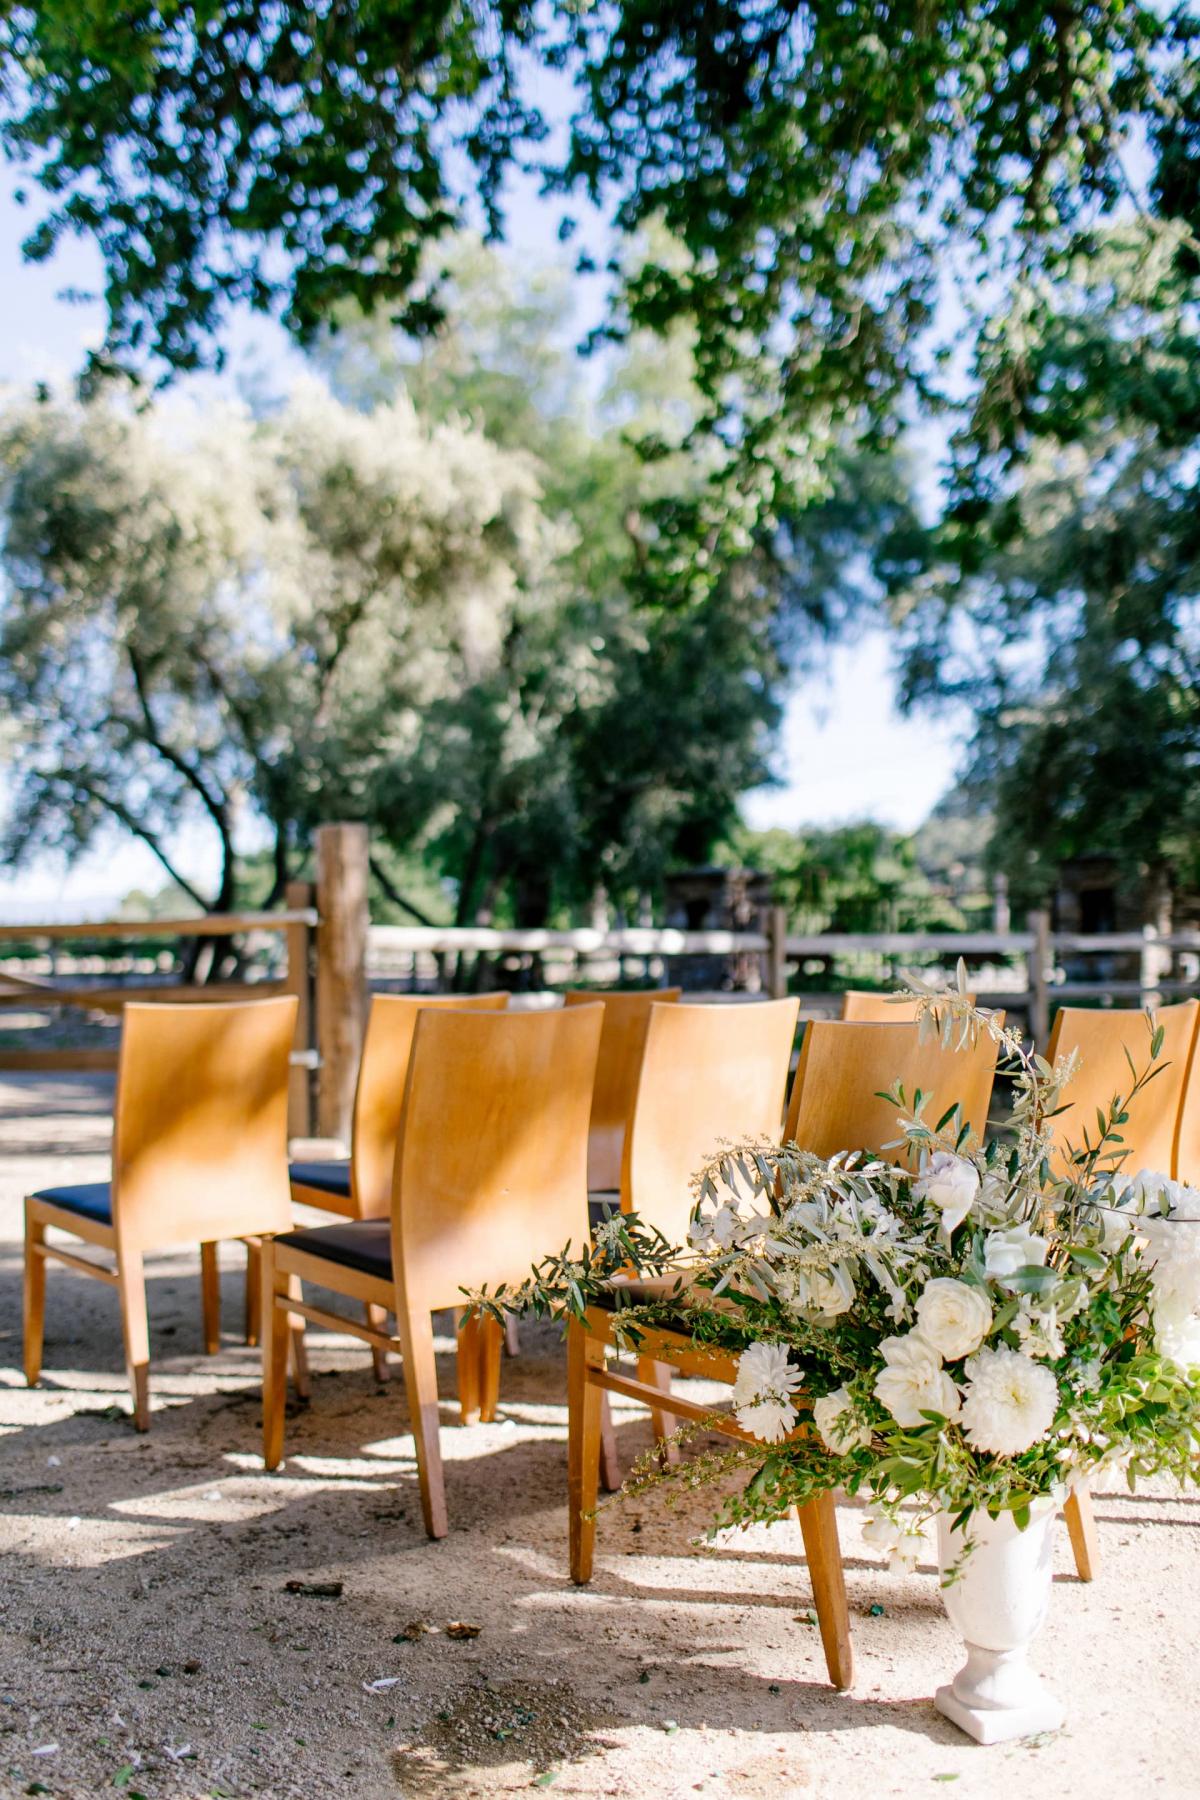 Outdoor Reception Area with Chairs, Flower Arrangements for Danielle & Jake's Wedding